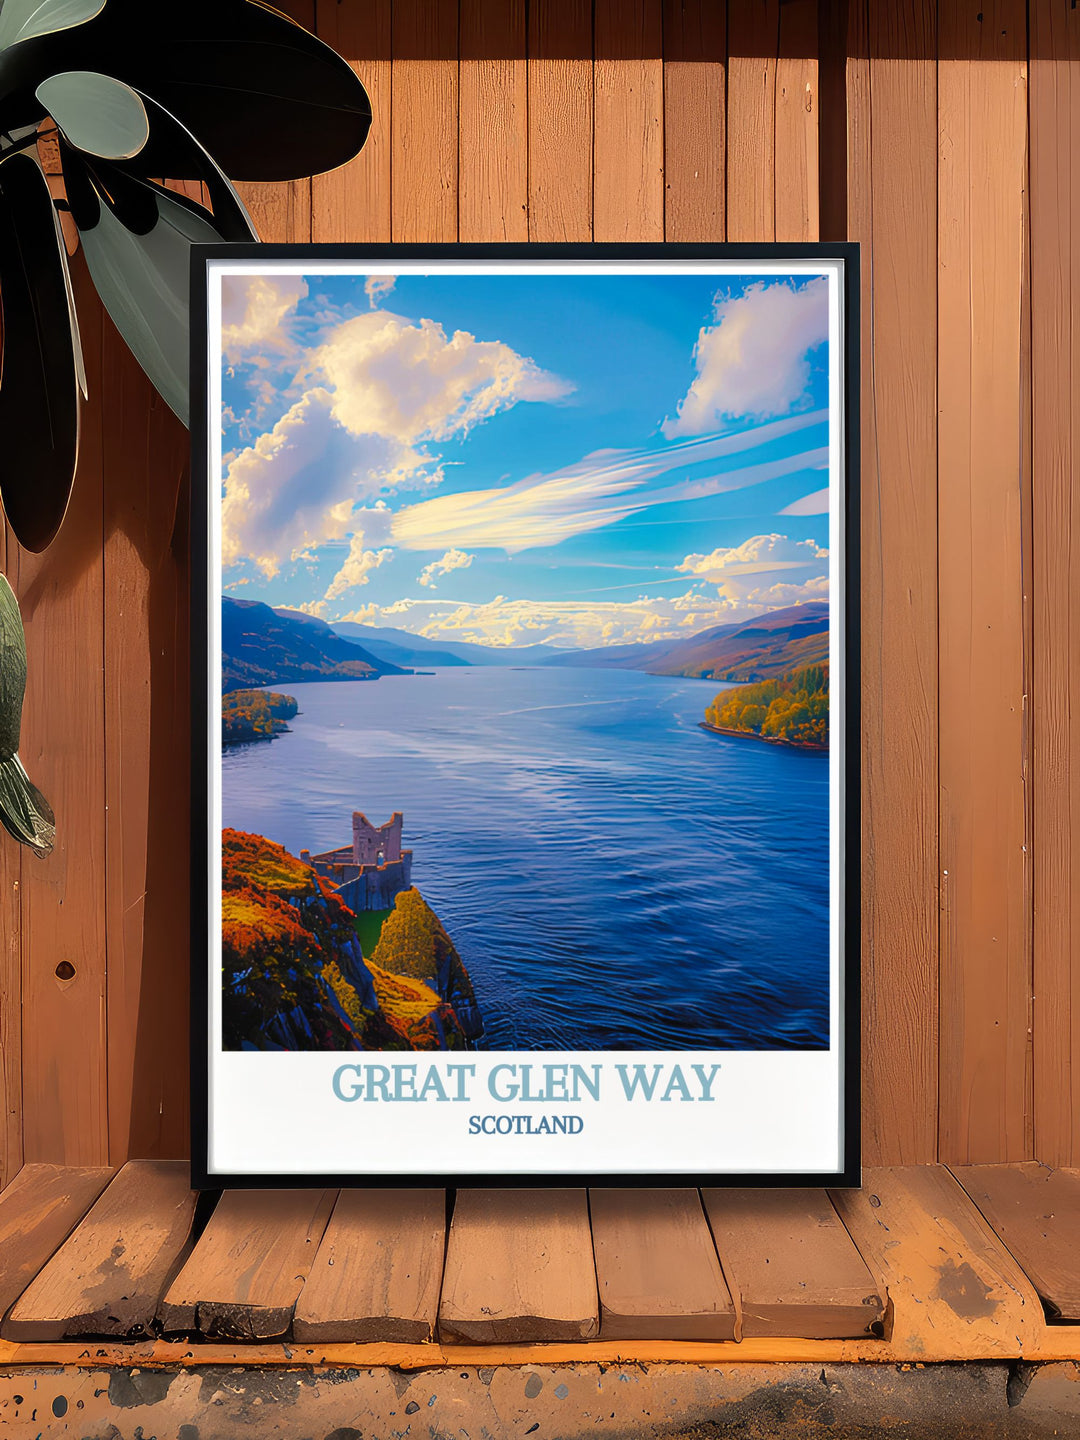 Featuring the majestic Ben Nevis, this art print captures the towering presence of Scotlands highest peak along the Great Glen Way, perfect for bringing the rugged beauty of the Highlands into your living space.